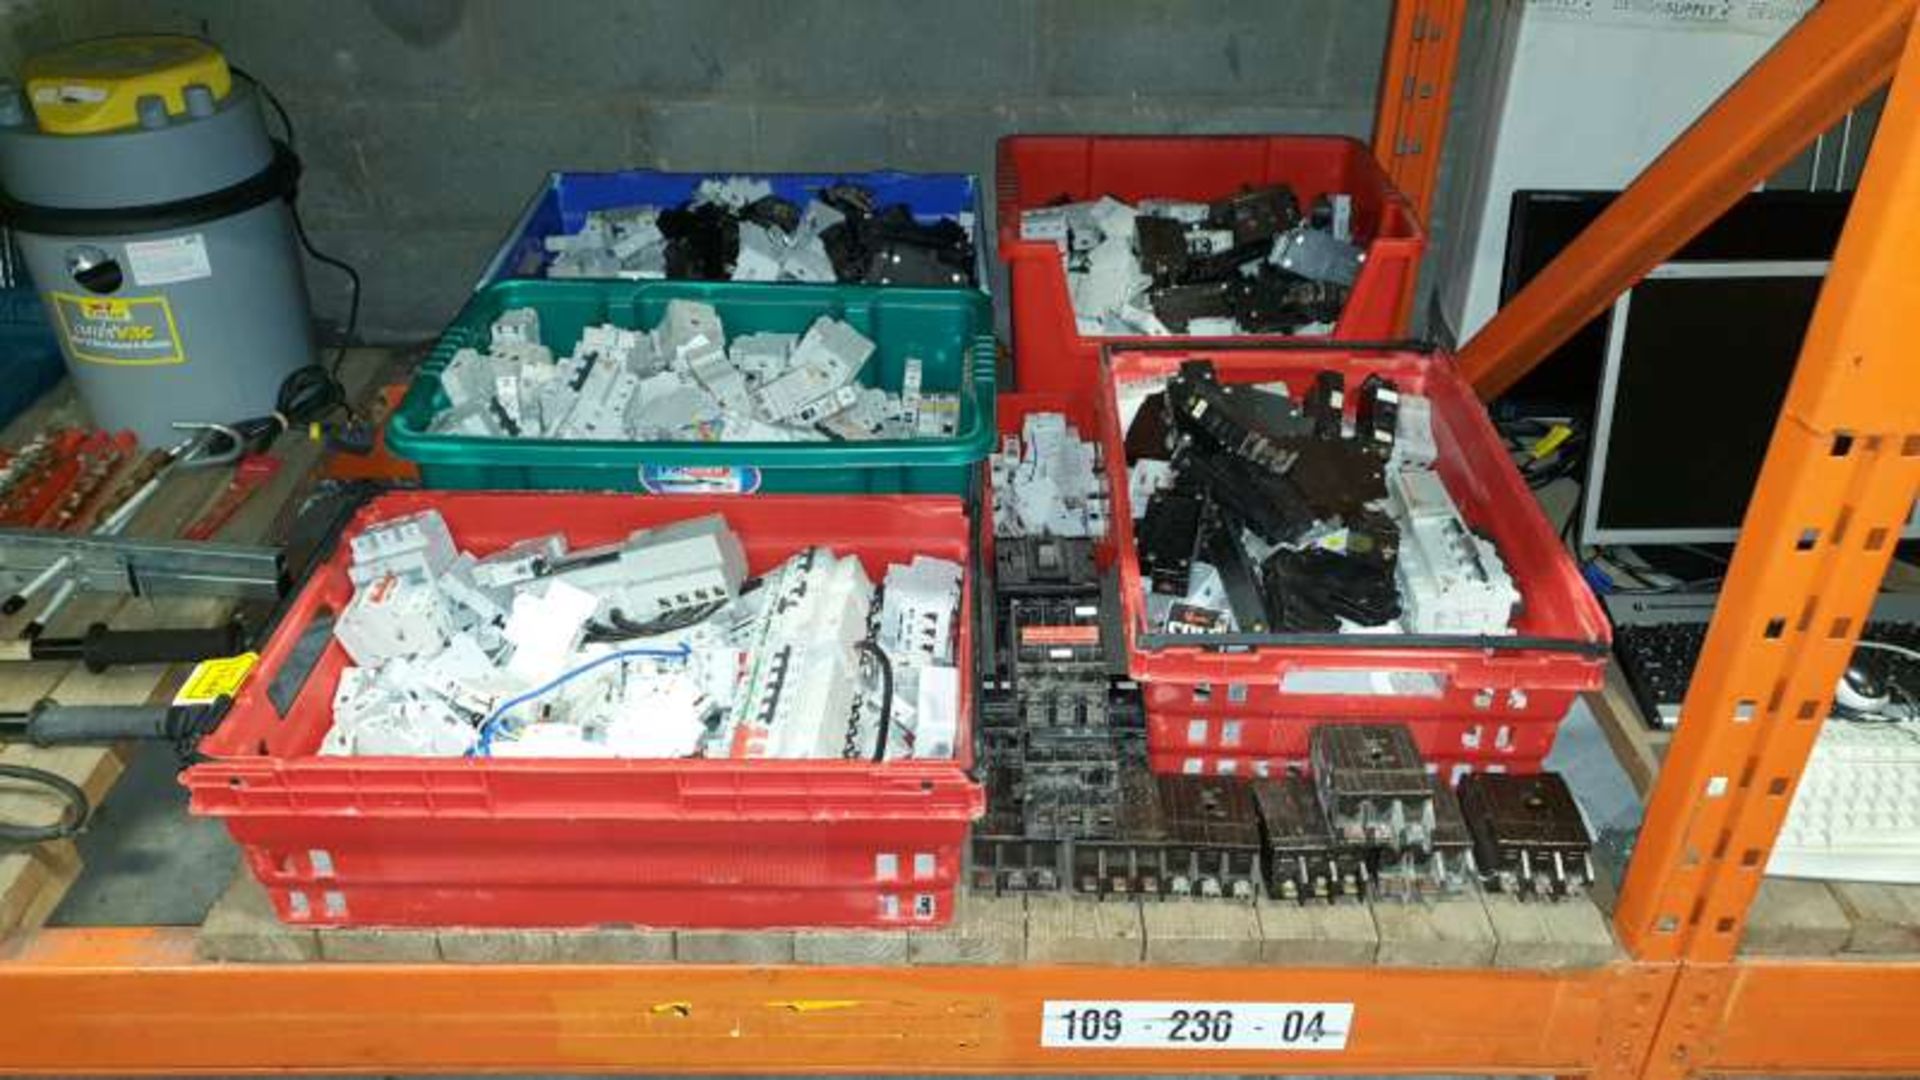 LOT CONTAINING A LARGE QTY OF VARIOUS CIRCUIT BREAKERS